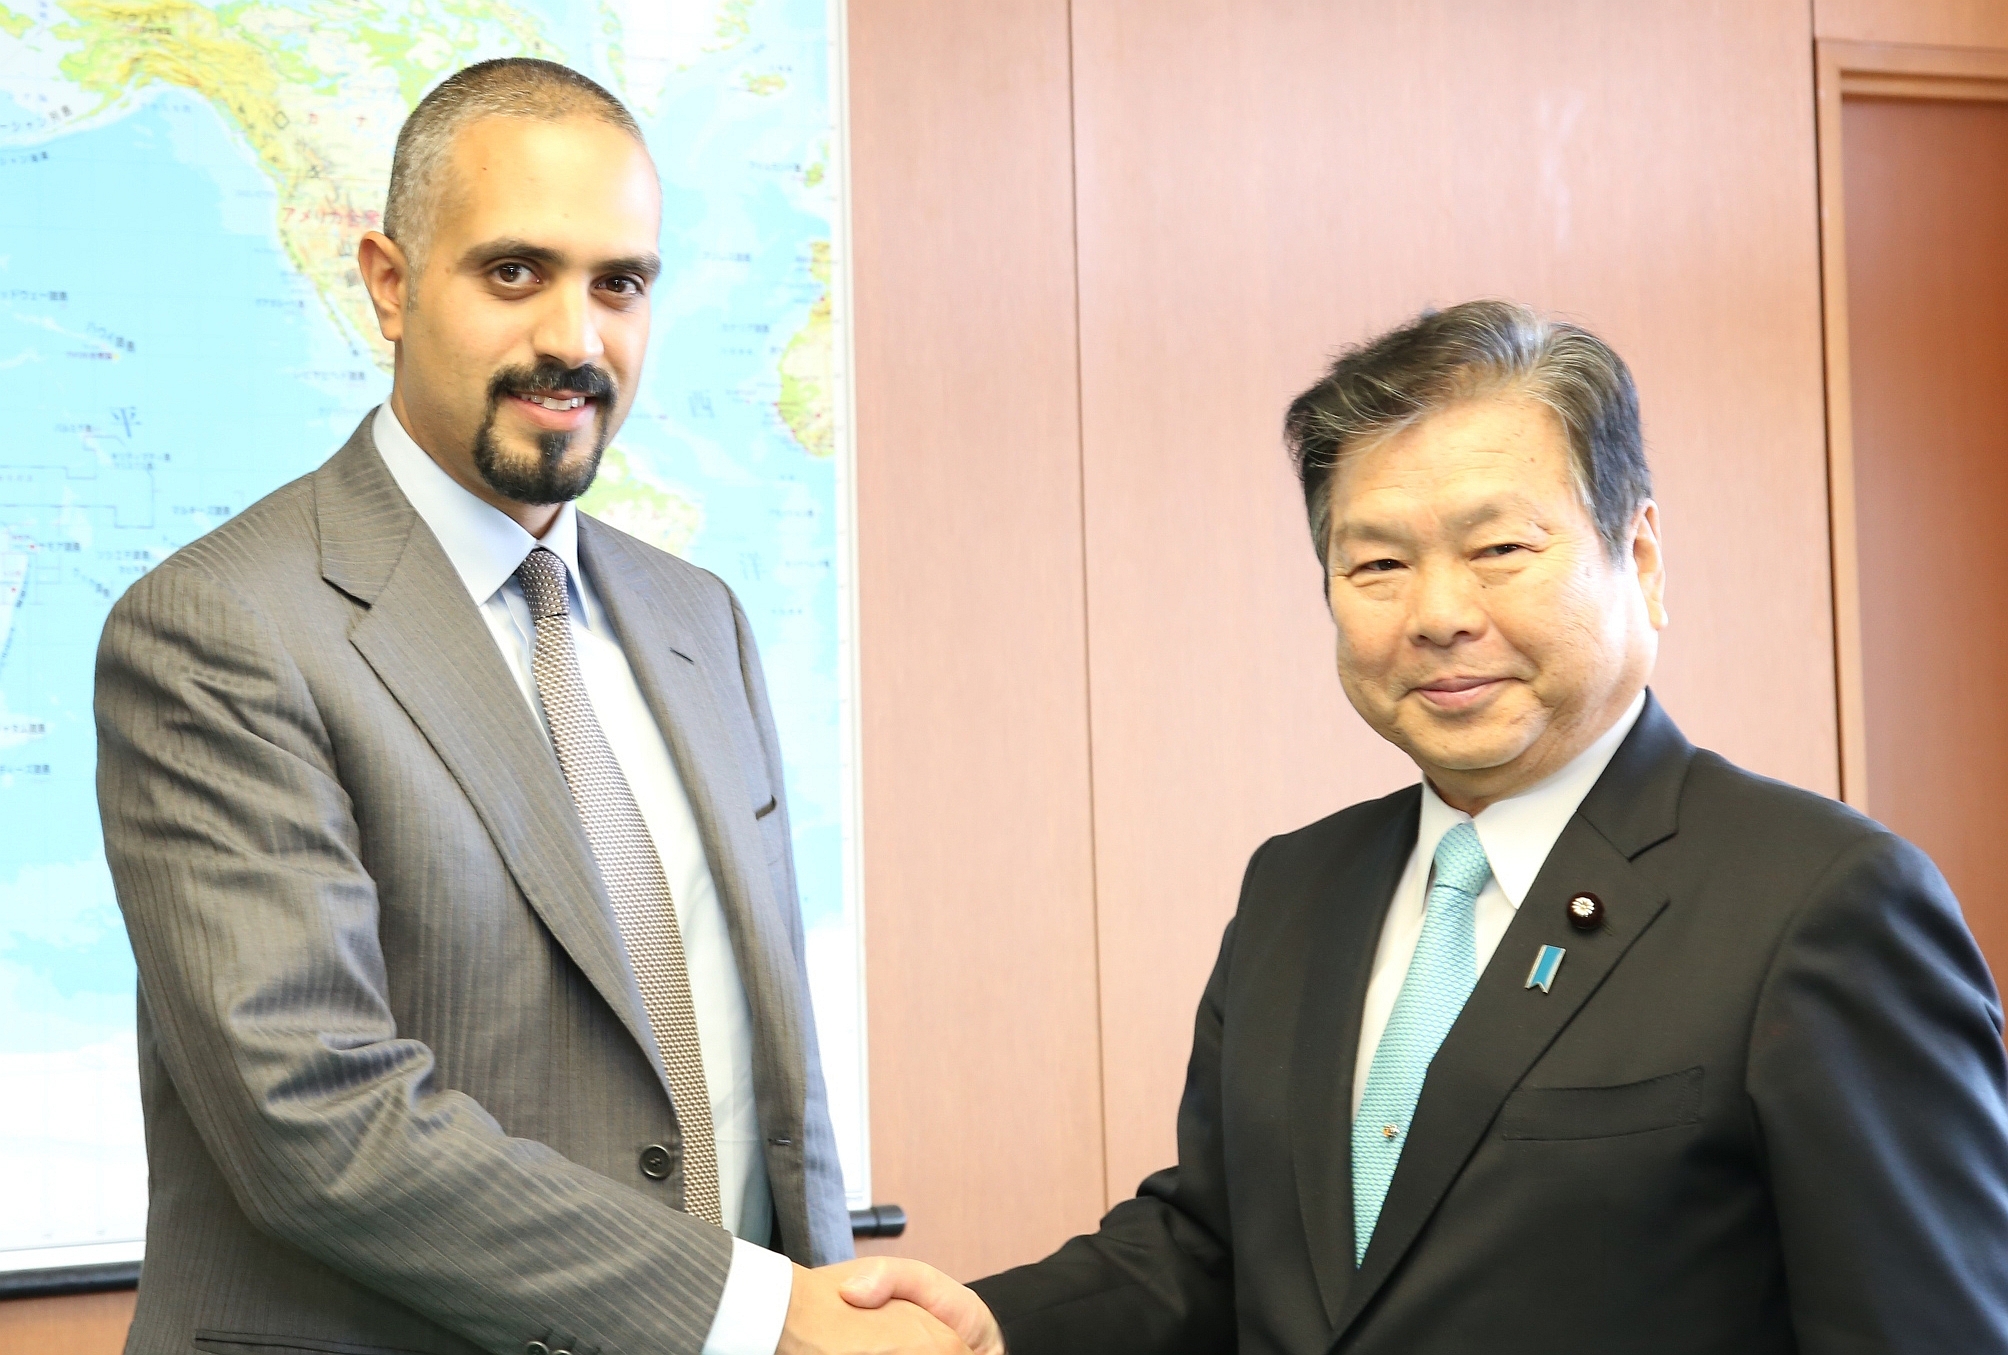 Director-General of the Kuwait Direct Investment Promotion Authority (KDIPA) Sheikh Dr. Meshaal Jaber Al-Ahmad Al-Sabah with Japanese State Minister for Foreign Affairs Yasuhide Nakayama